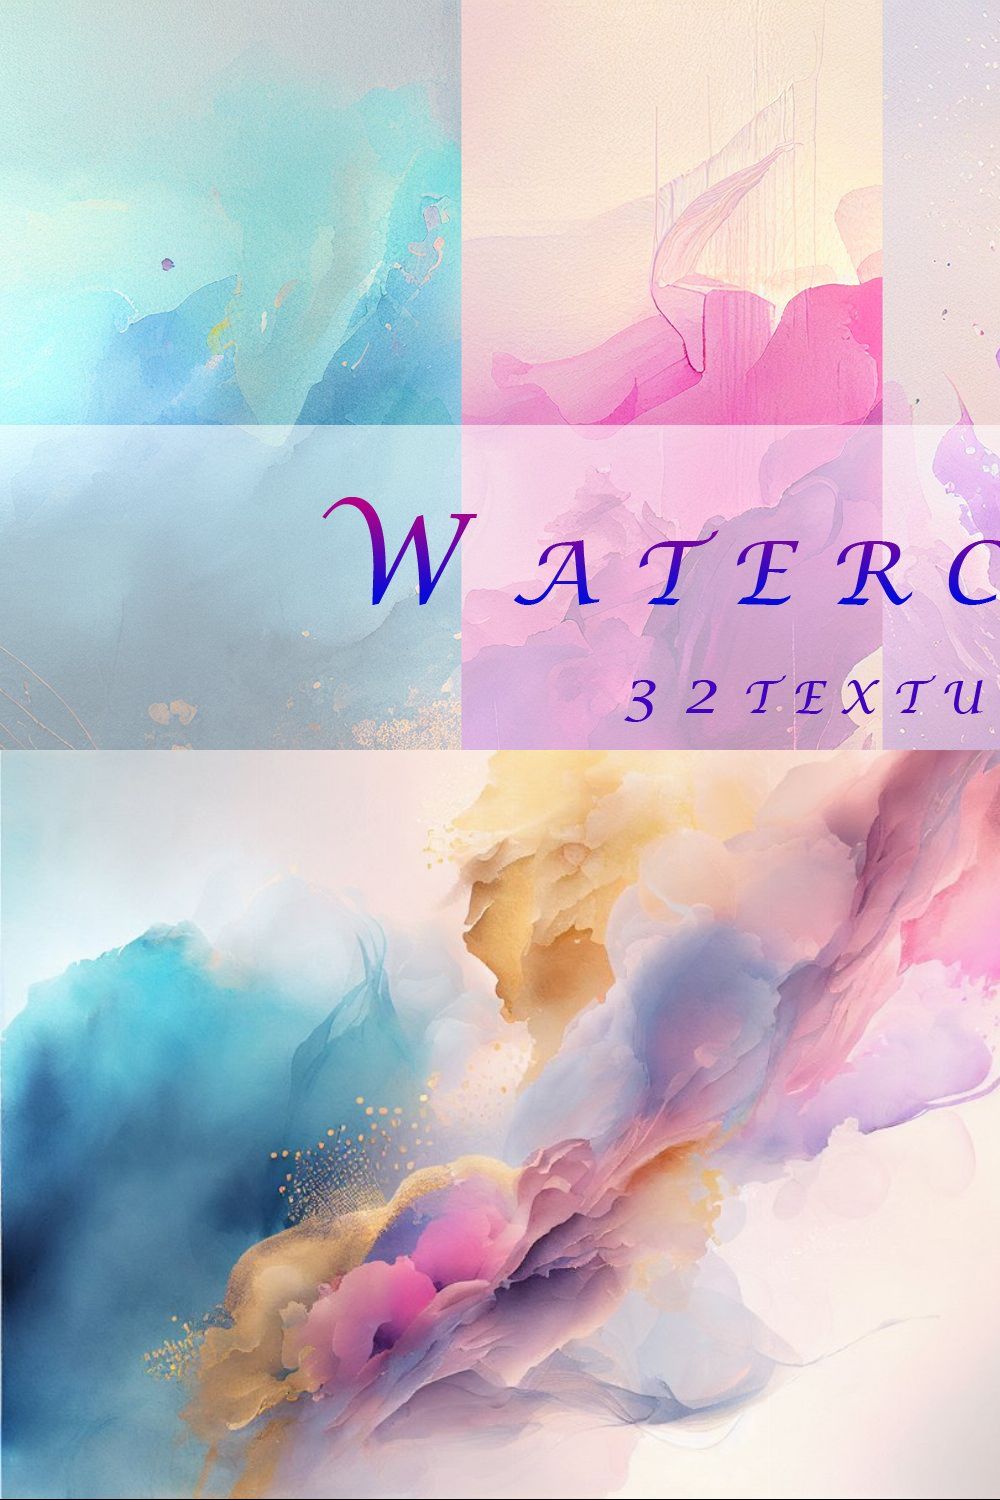 Watercolor colorful textures pinterest preview image.